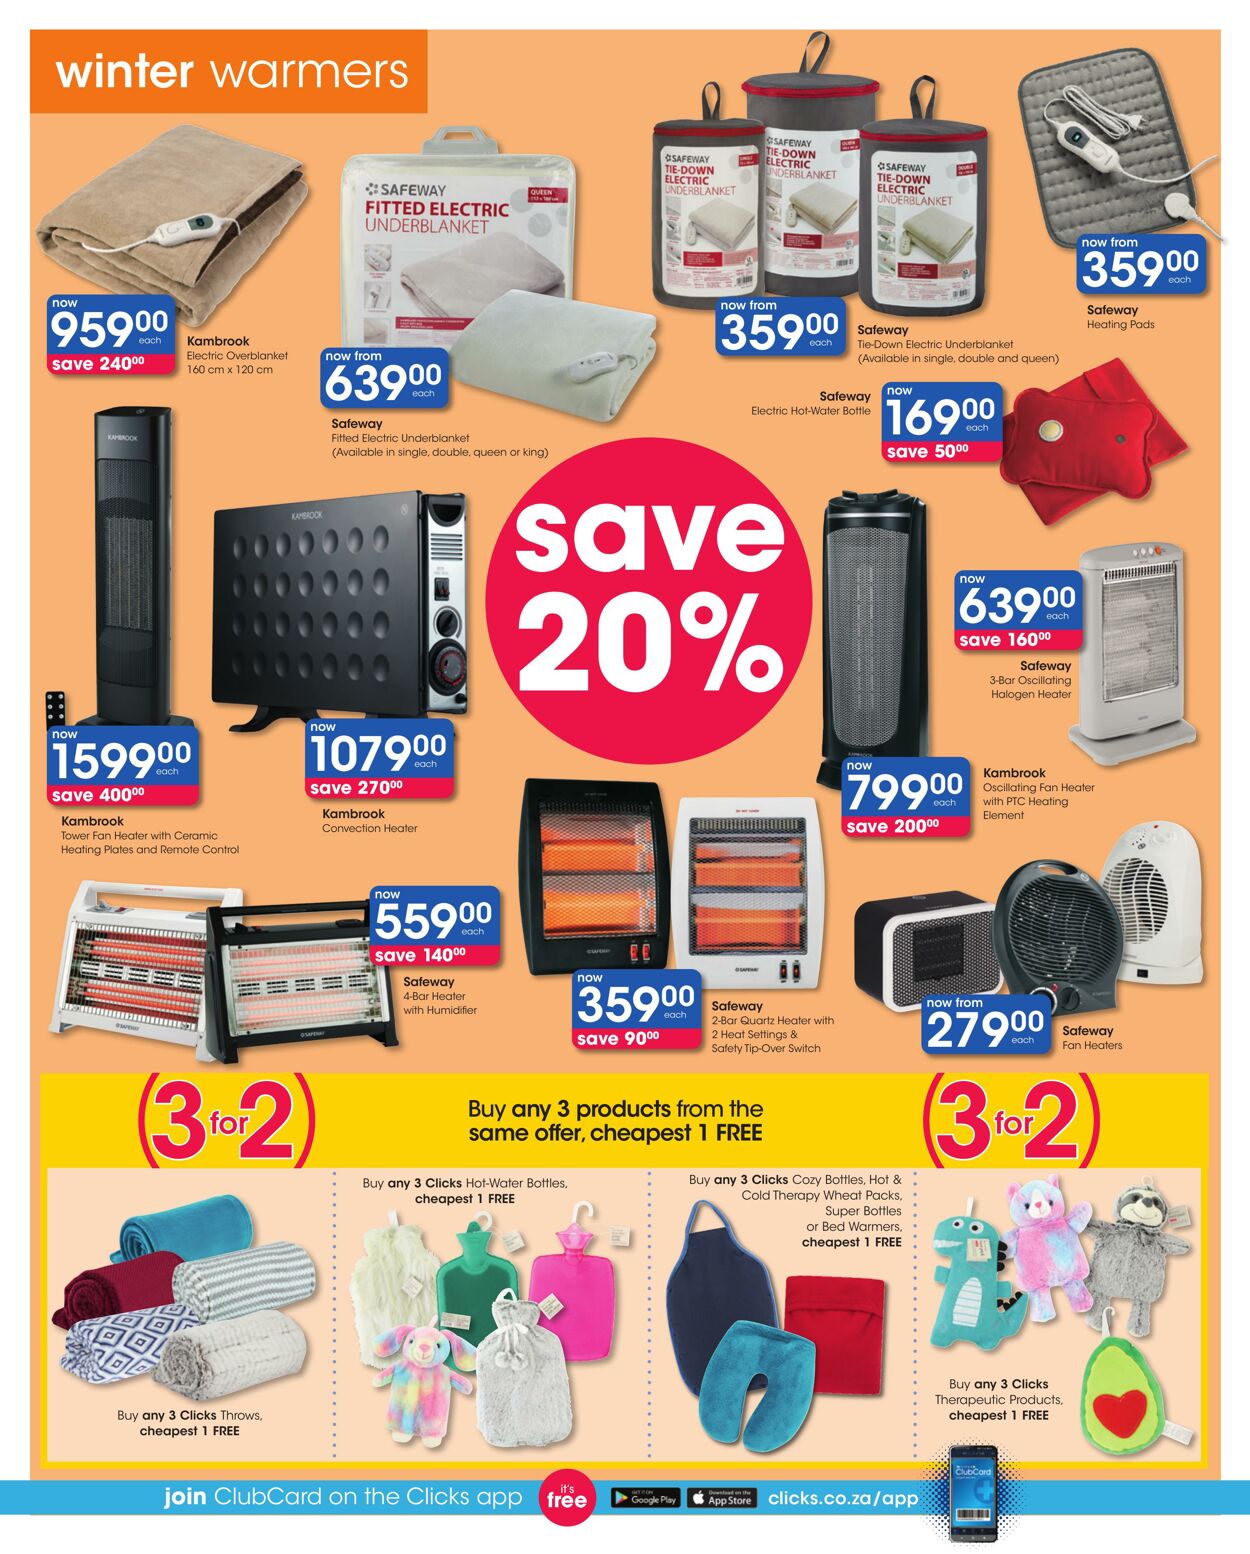 Clicks Promotional Leaflet - Valid from 20.01 to 08.02 - Page nb 44 